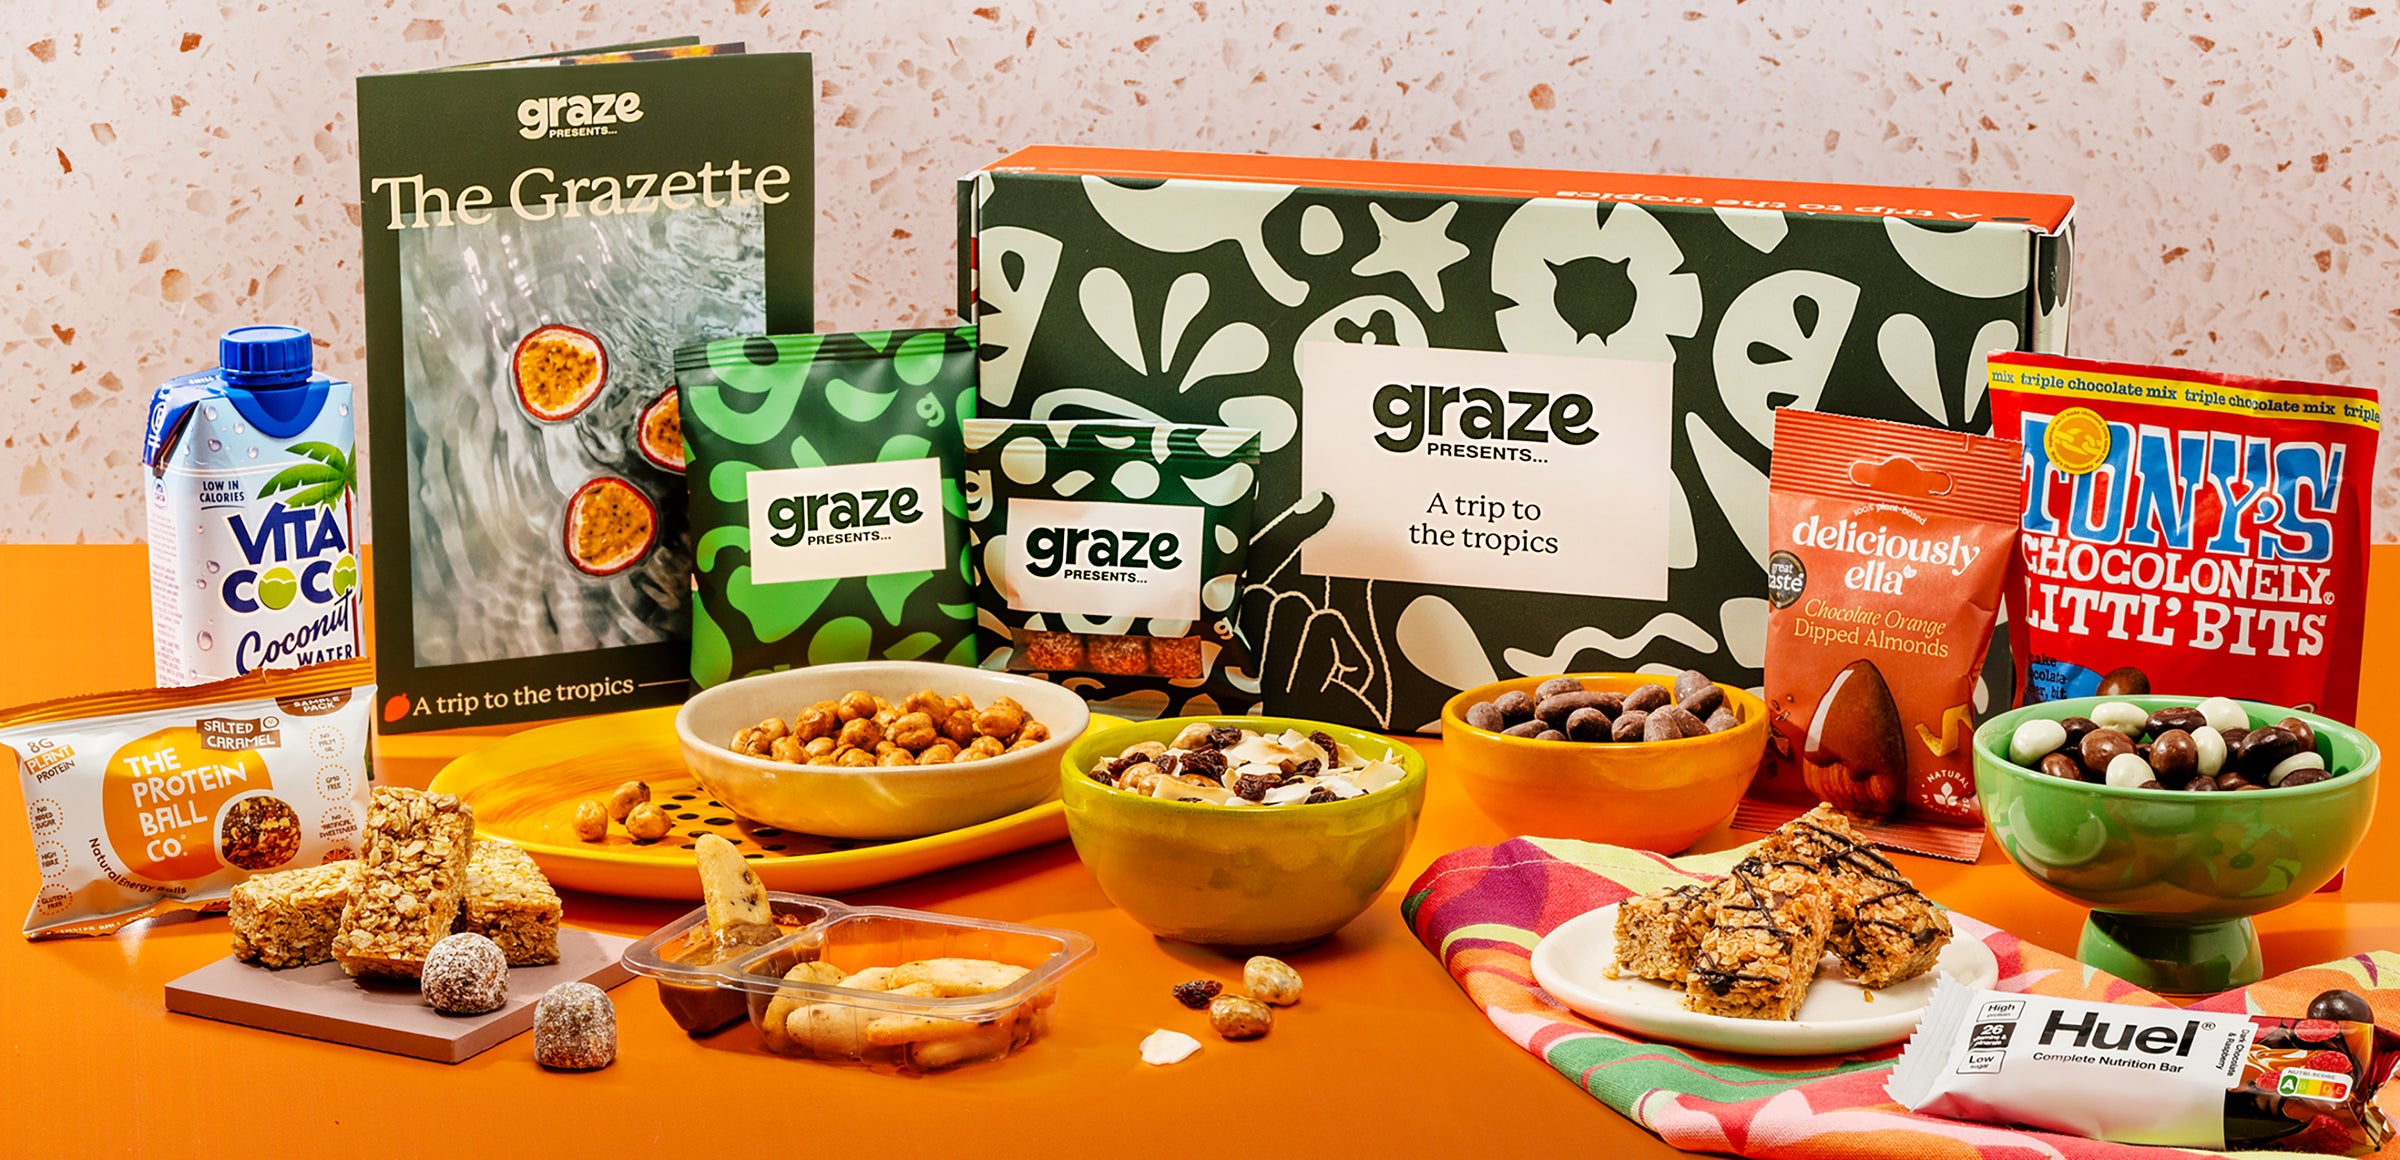 Graze Presents 'a garden in bloom' box contents laid out like a picnic on a plain white surface